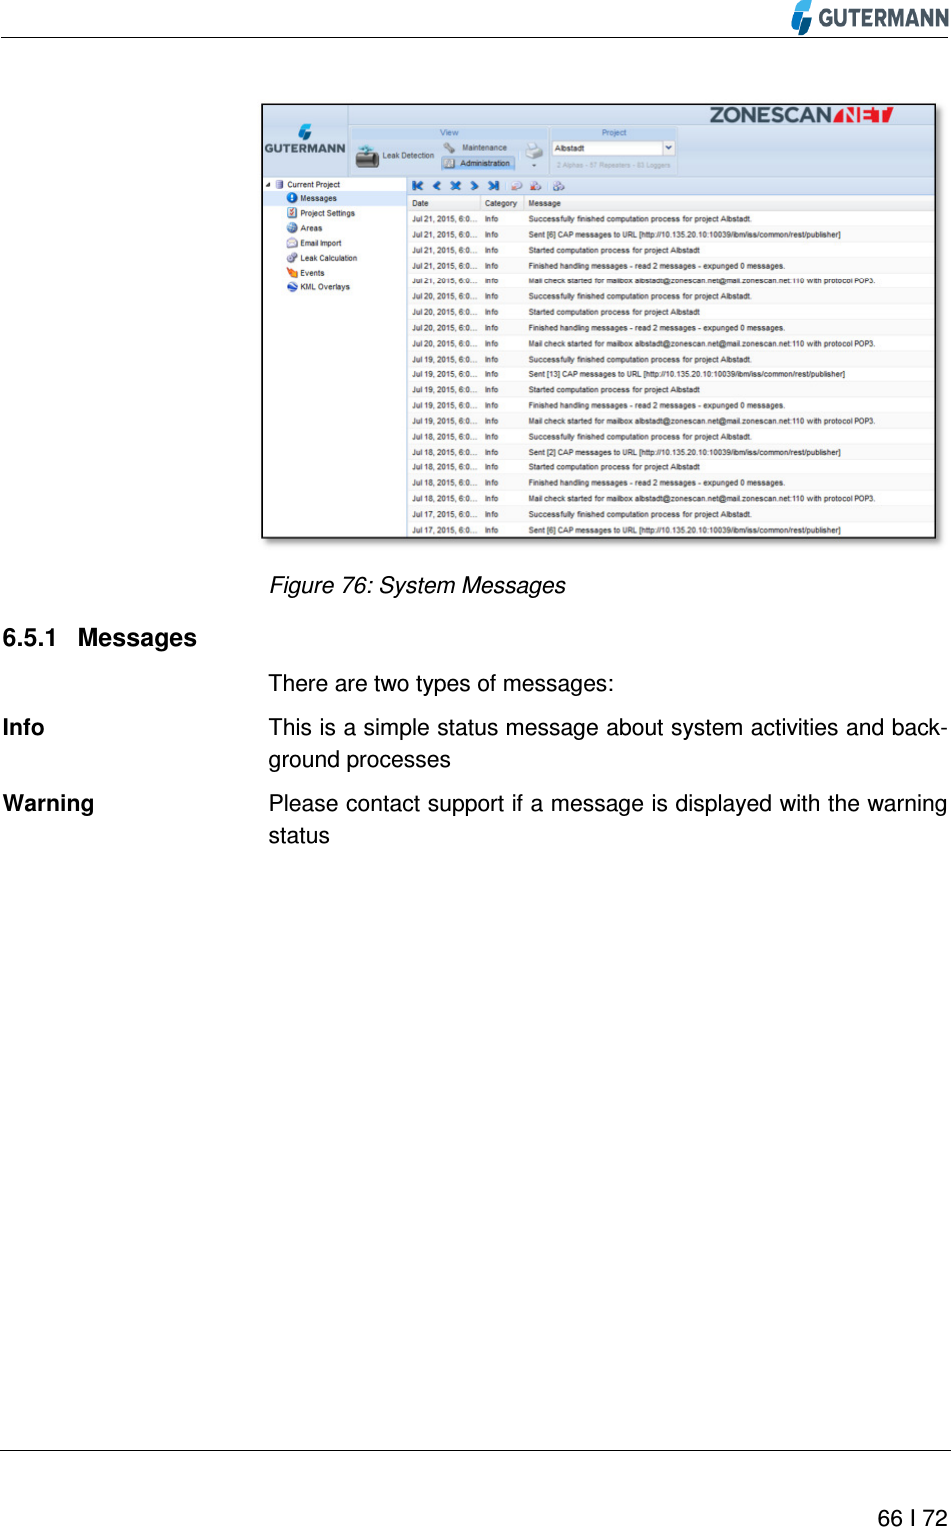          66 I 72   Figure 76: System Messages  6.5.1  Messages There are two types of messages: This is a simple status message about system activities and back-ground processes Please contact support if a message is displayed with the warning status    Info Warning 